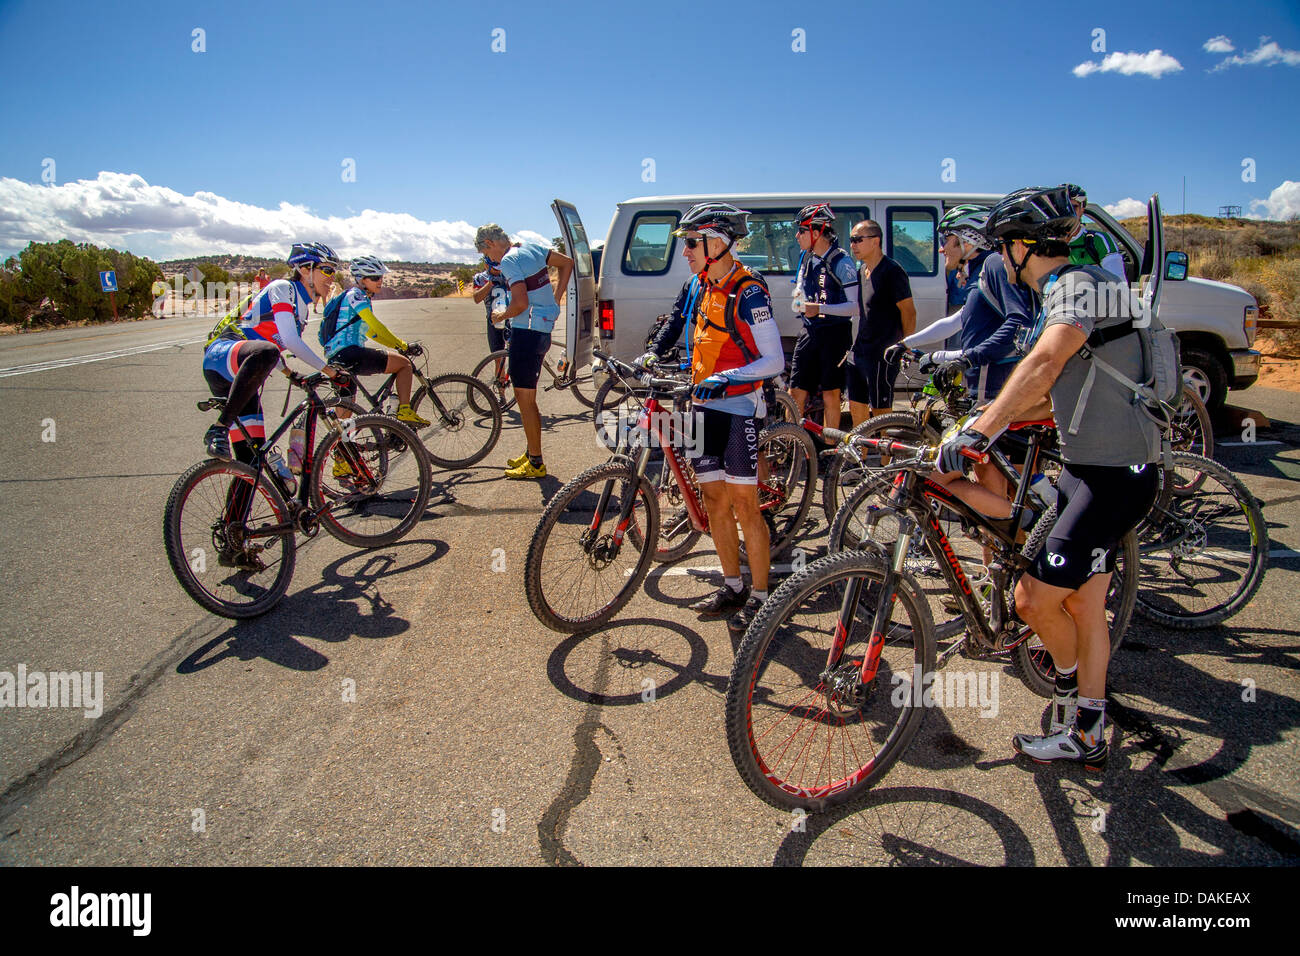 Wearing helmets and specialized clothing, an Italian mountain bicycle club greets two women members at Utah roadside. Stock Photo